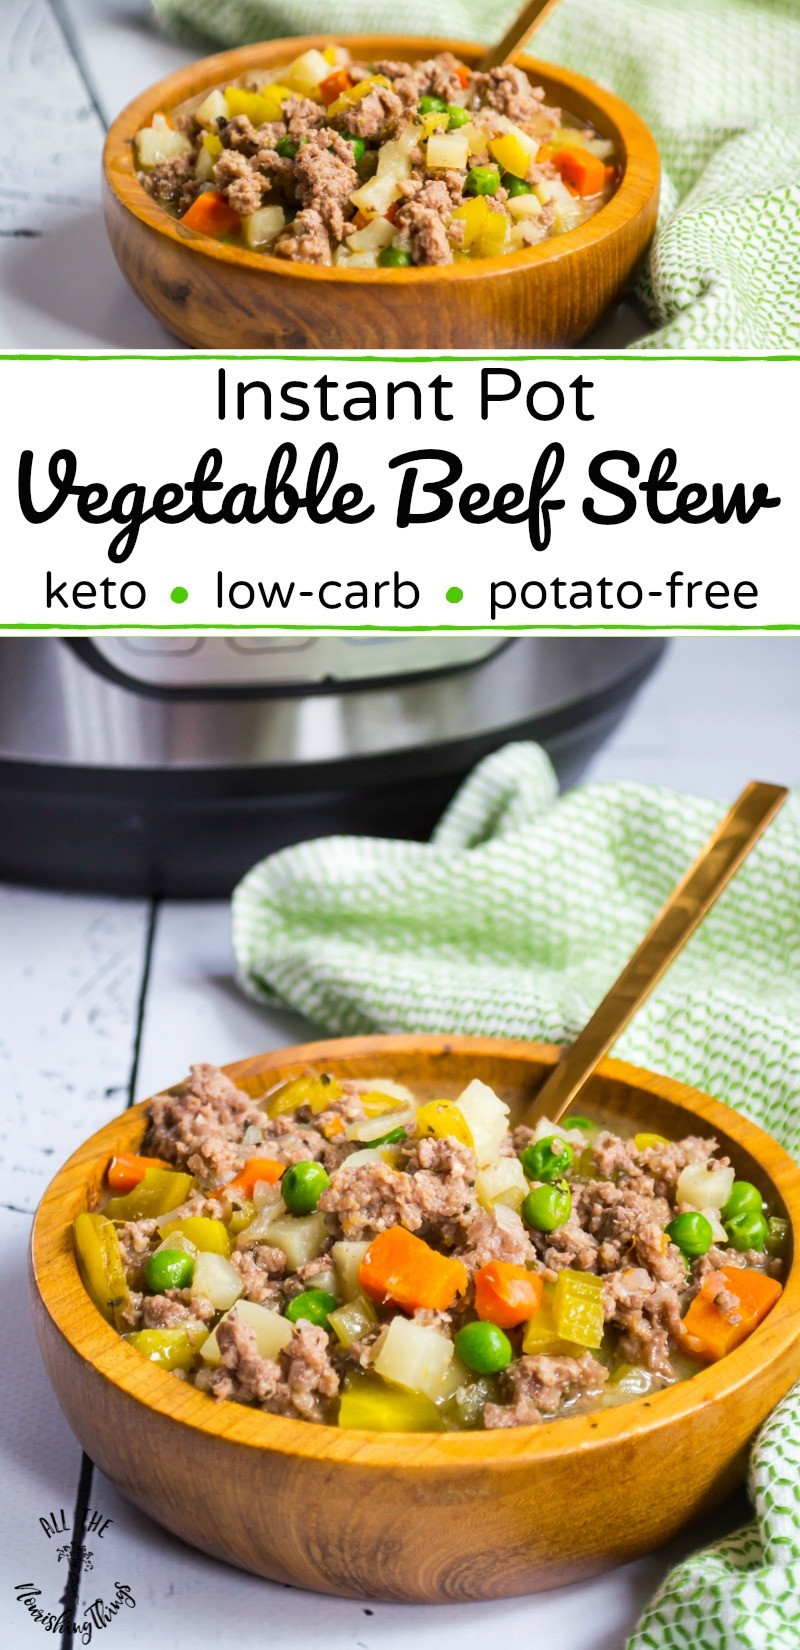 Instant Pot Beef Keto
 Instant Pot Ve able Beef Stew keto Whole30 potato free